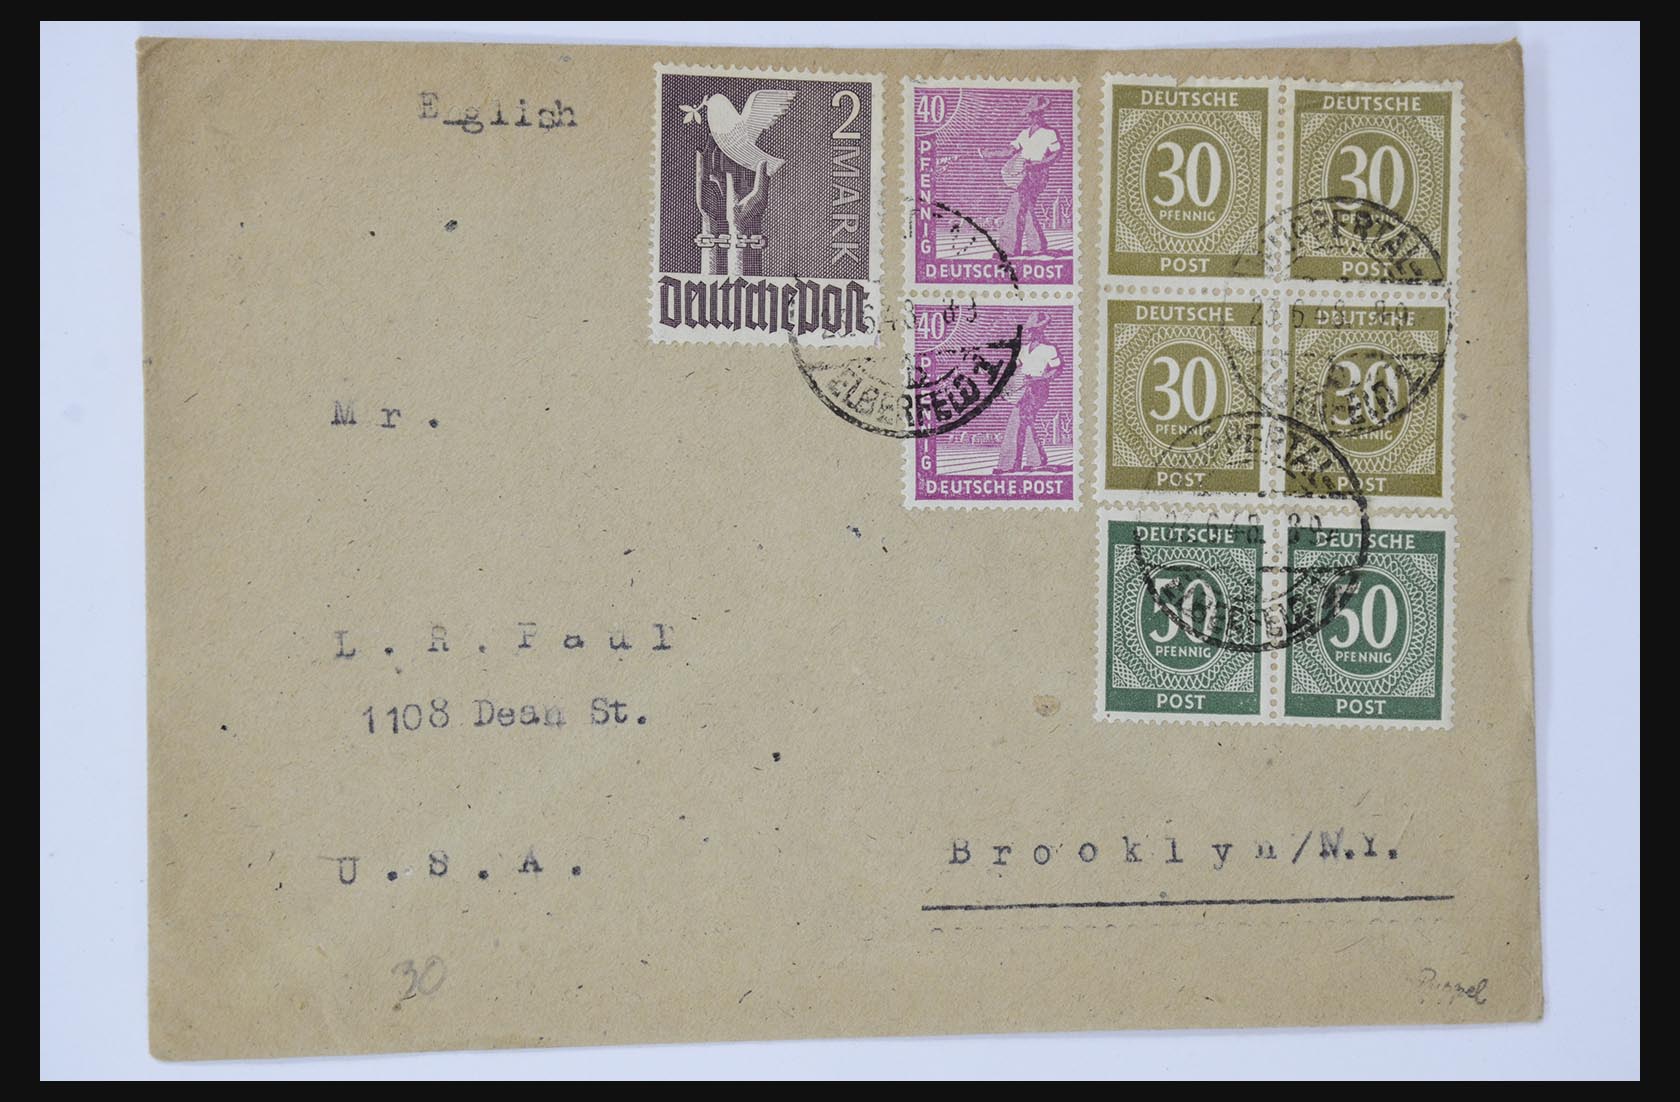 31581 035 - 31581 Germany covers and FDC's 1945-1981.